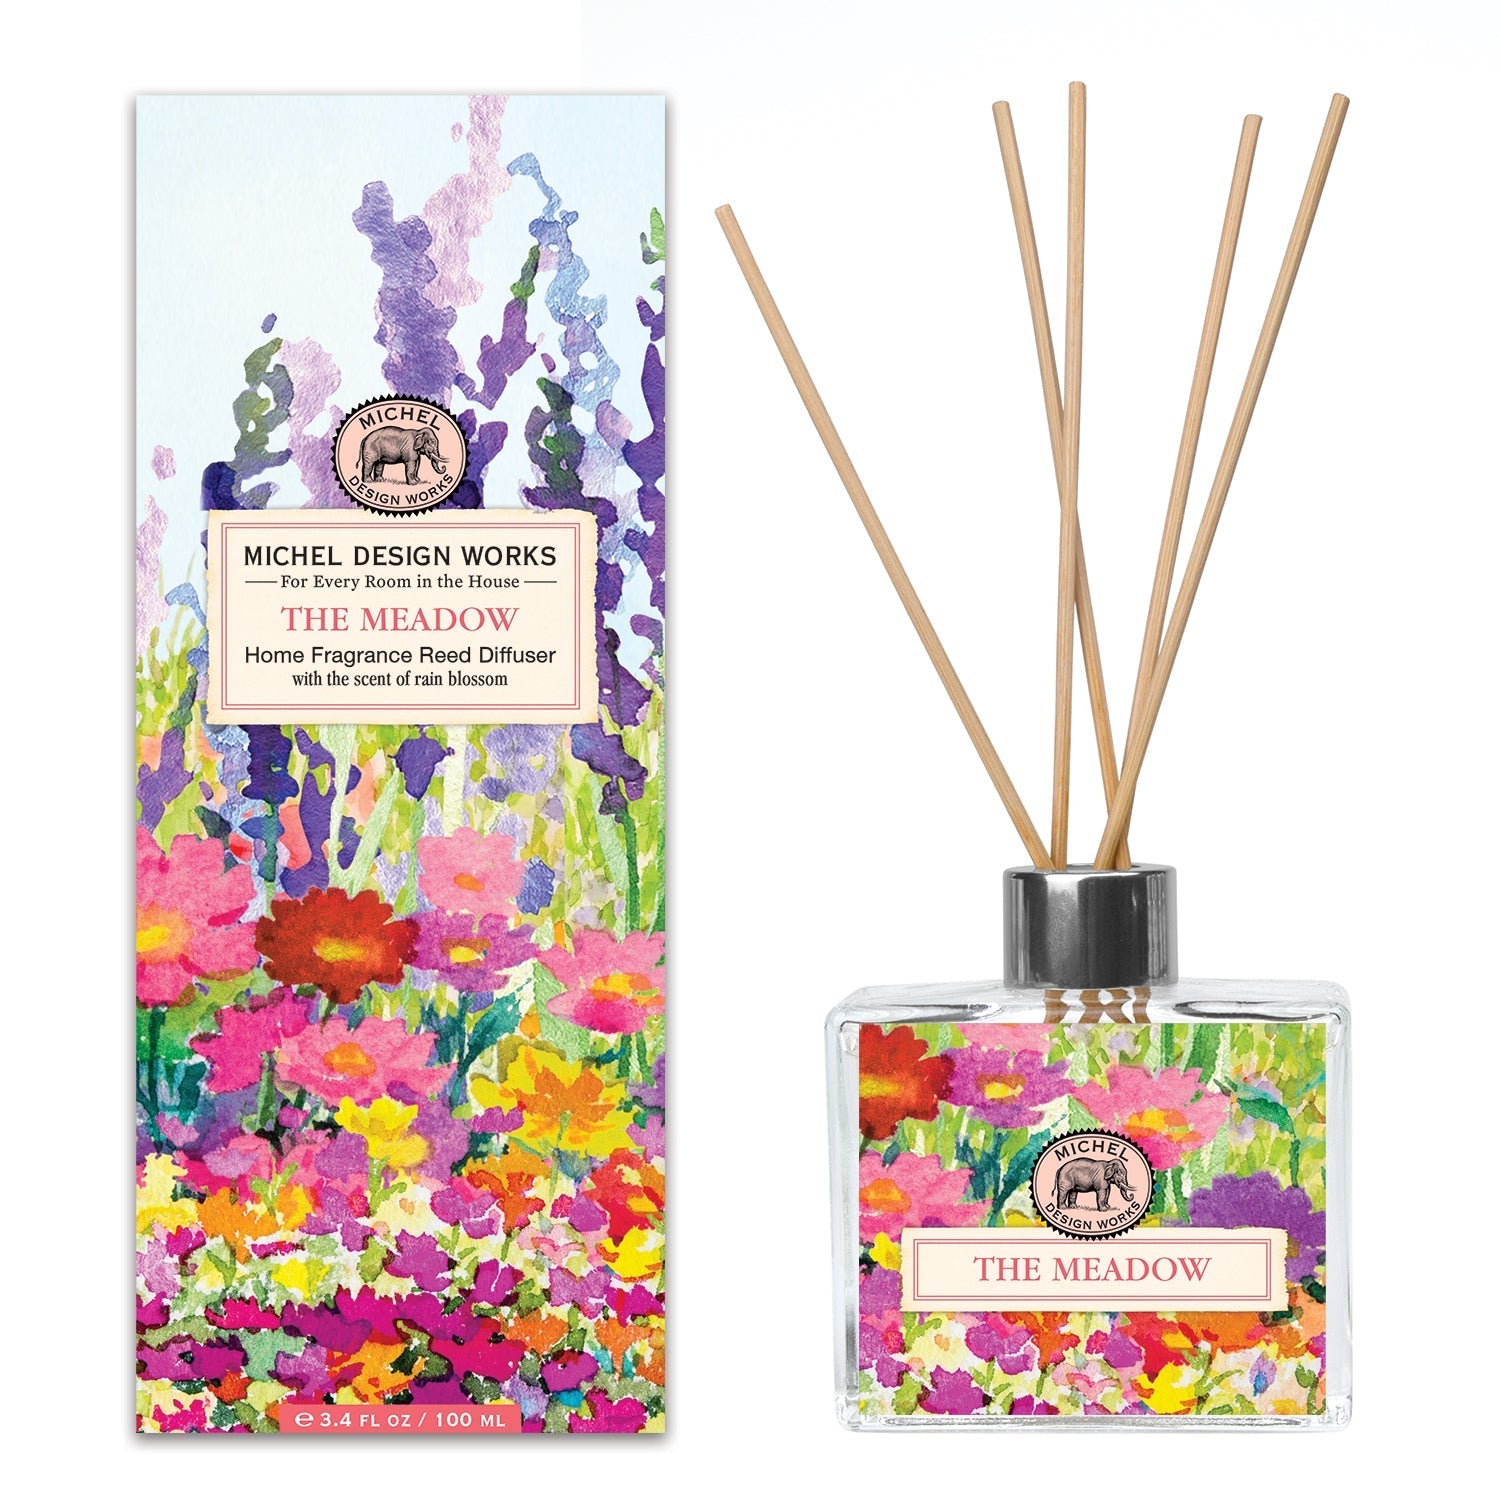 The Meadow - Home Fragrance Reed Diffuser    